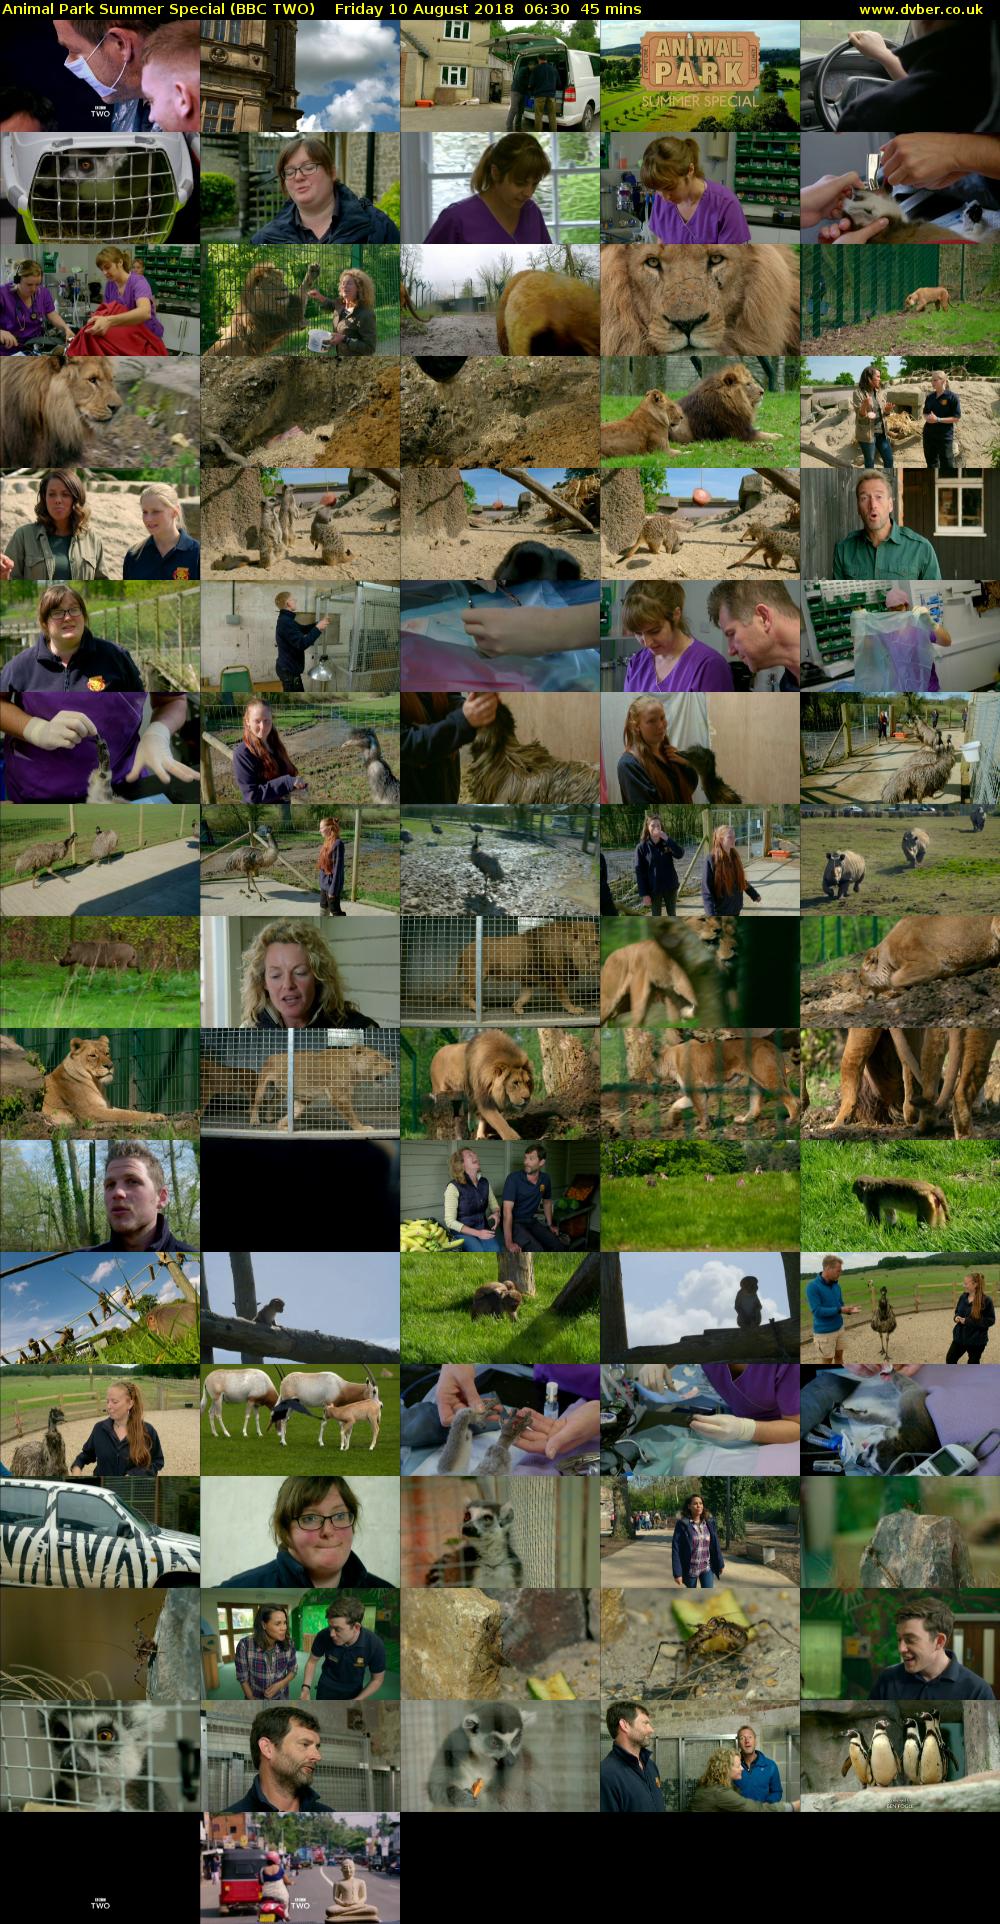 Animal Park Summer Special (BBC TWO) Friday 10 August 2018 06:30 - 07:15